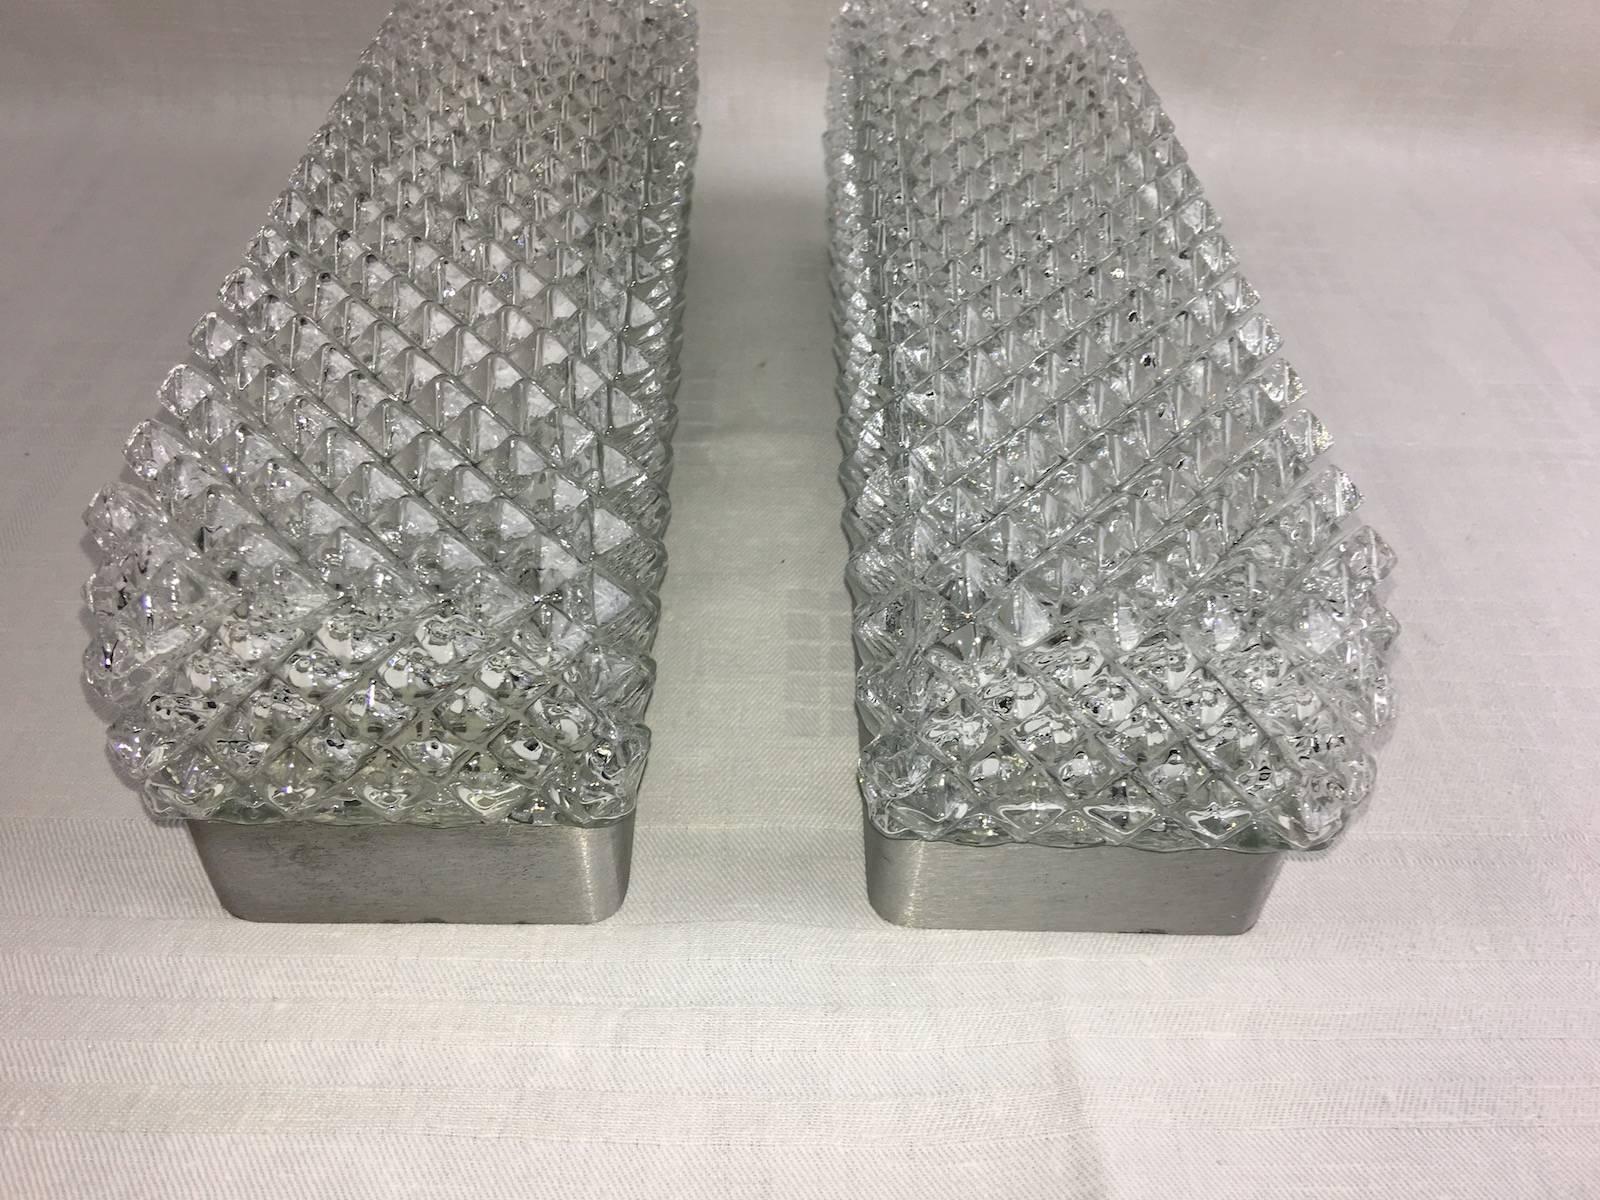 Pair of 1960s German Limburg Textured Vanity Glass Sconces In Good Condition For Sale In Frisco, TX